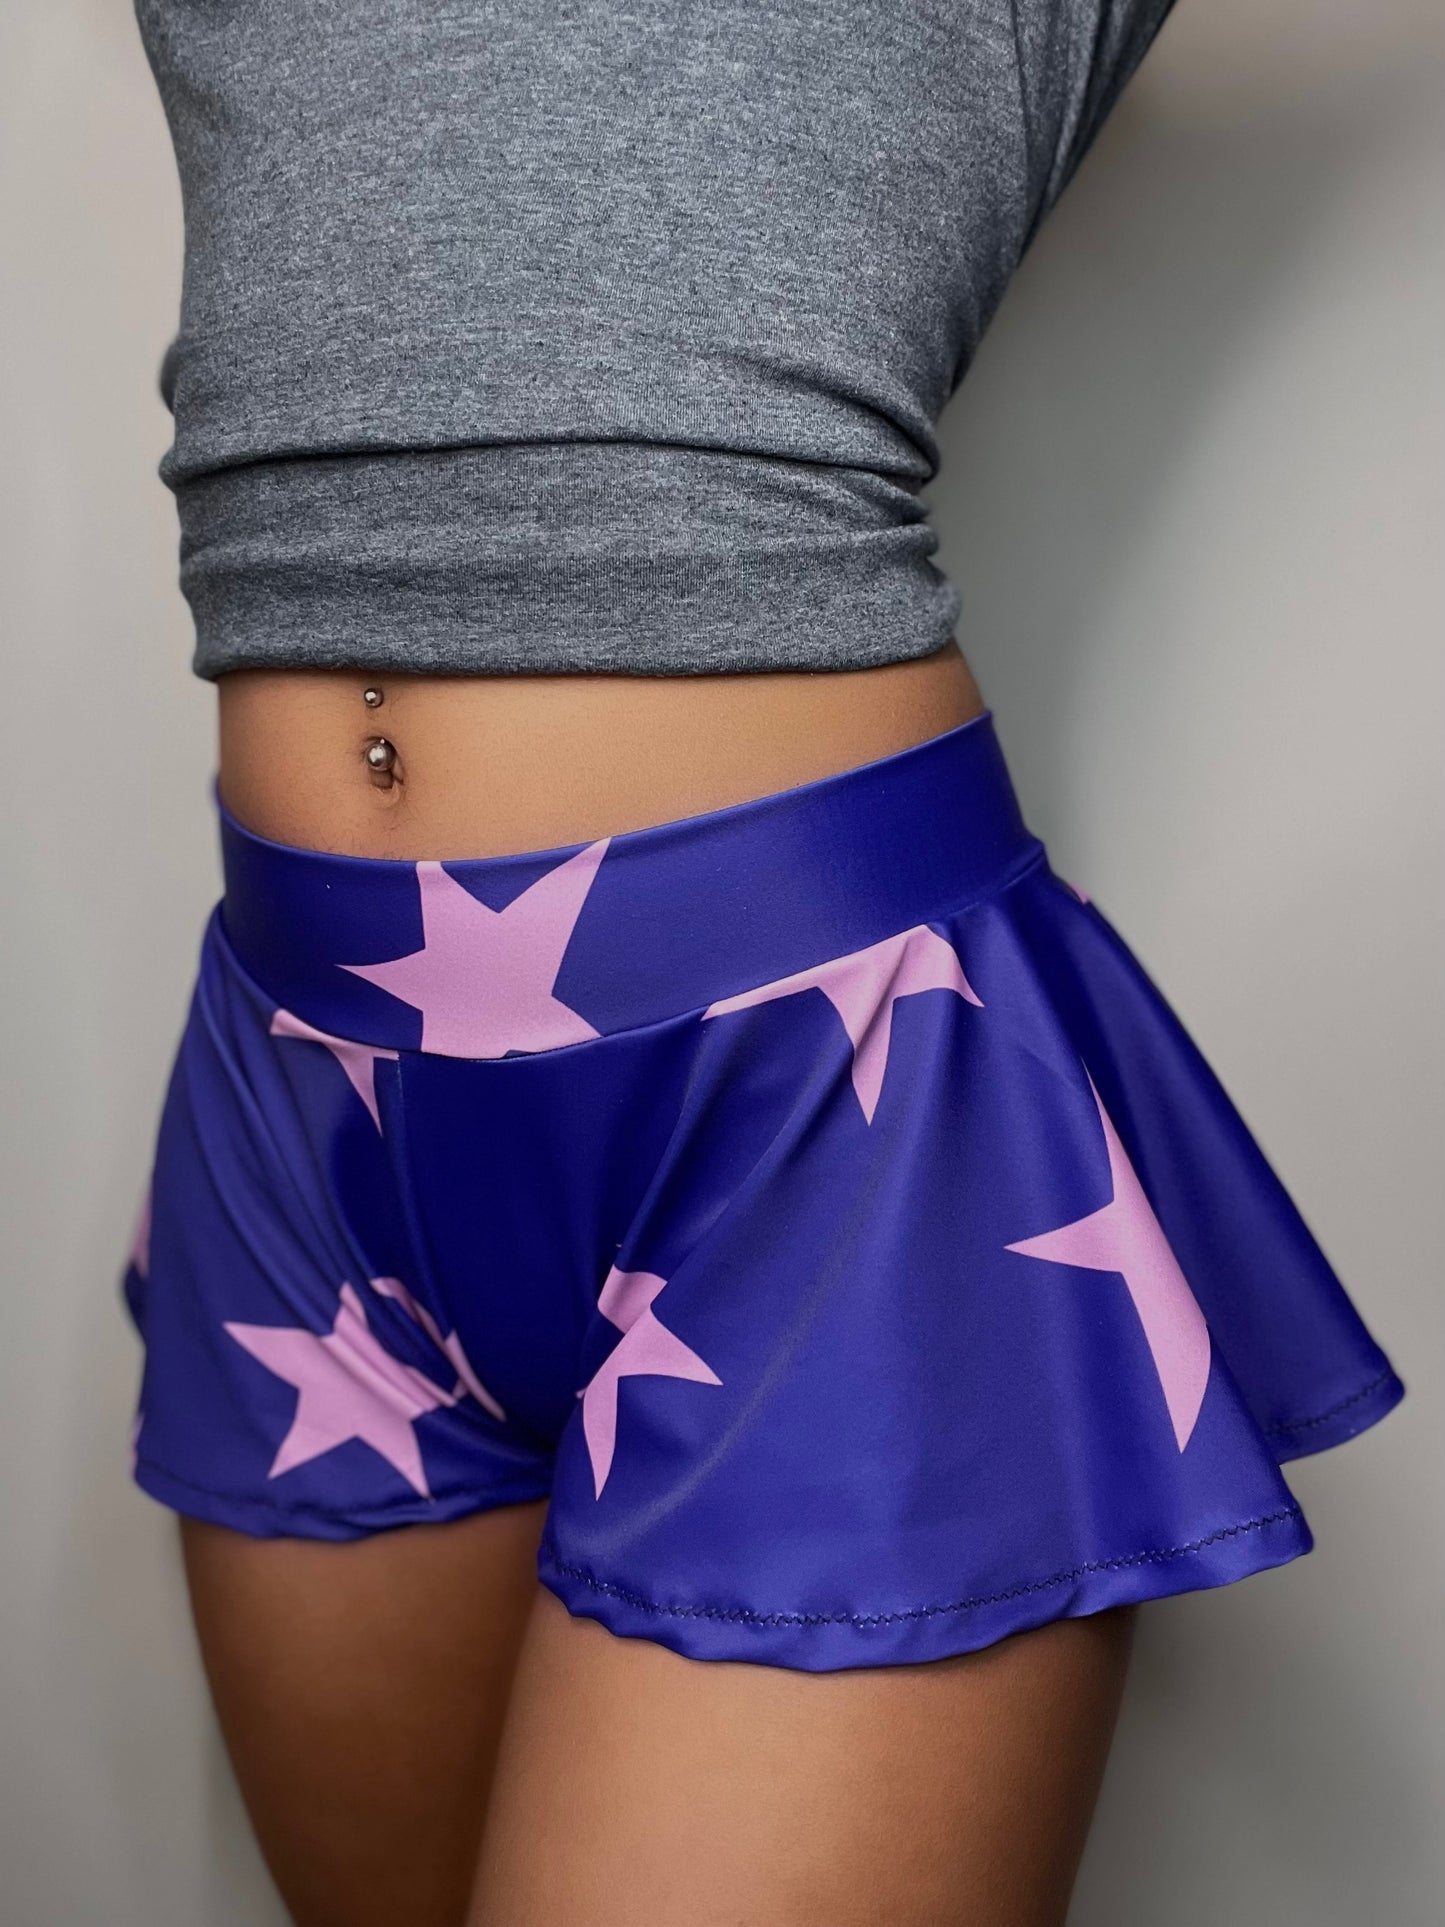 “THE MARK” inspired shorties